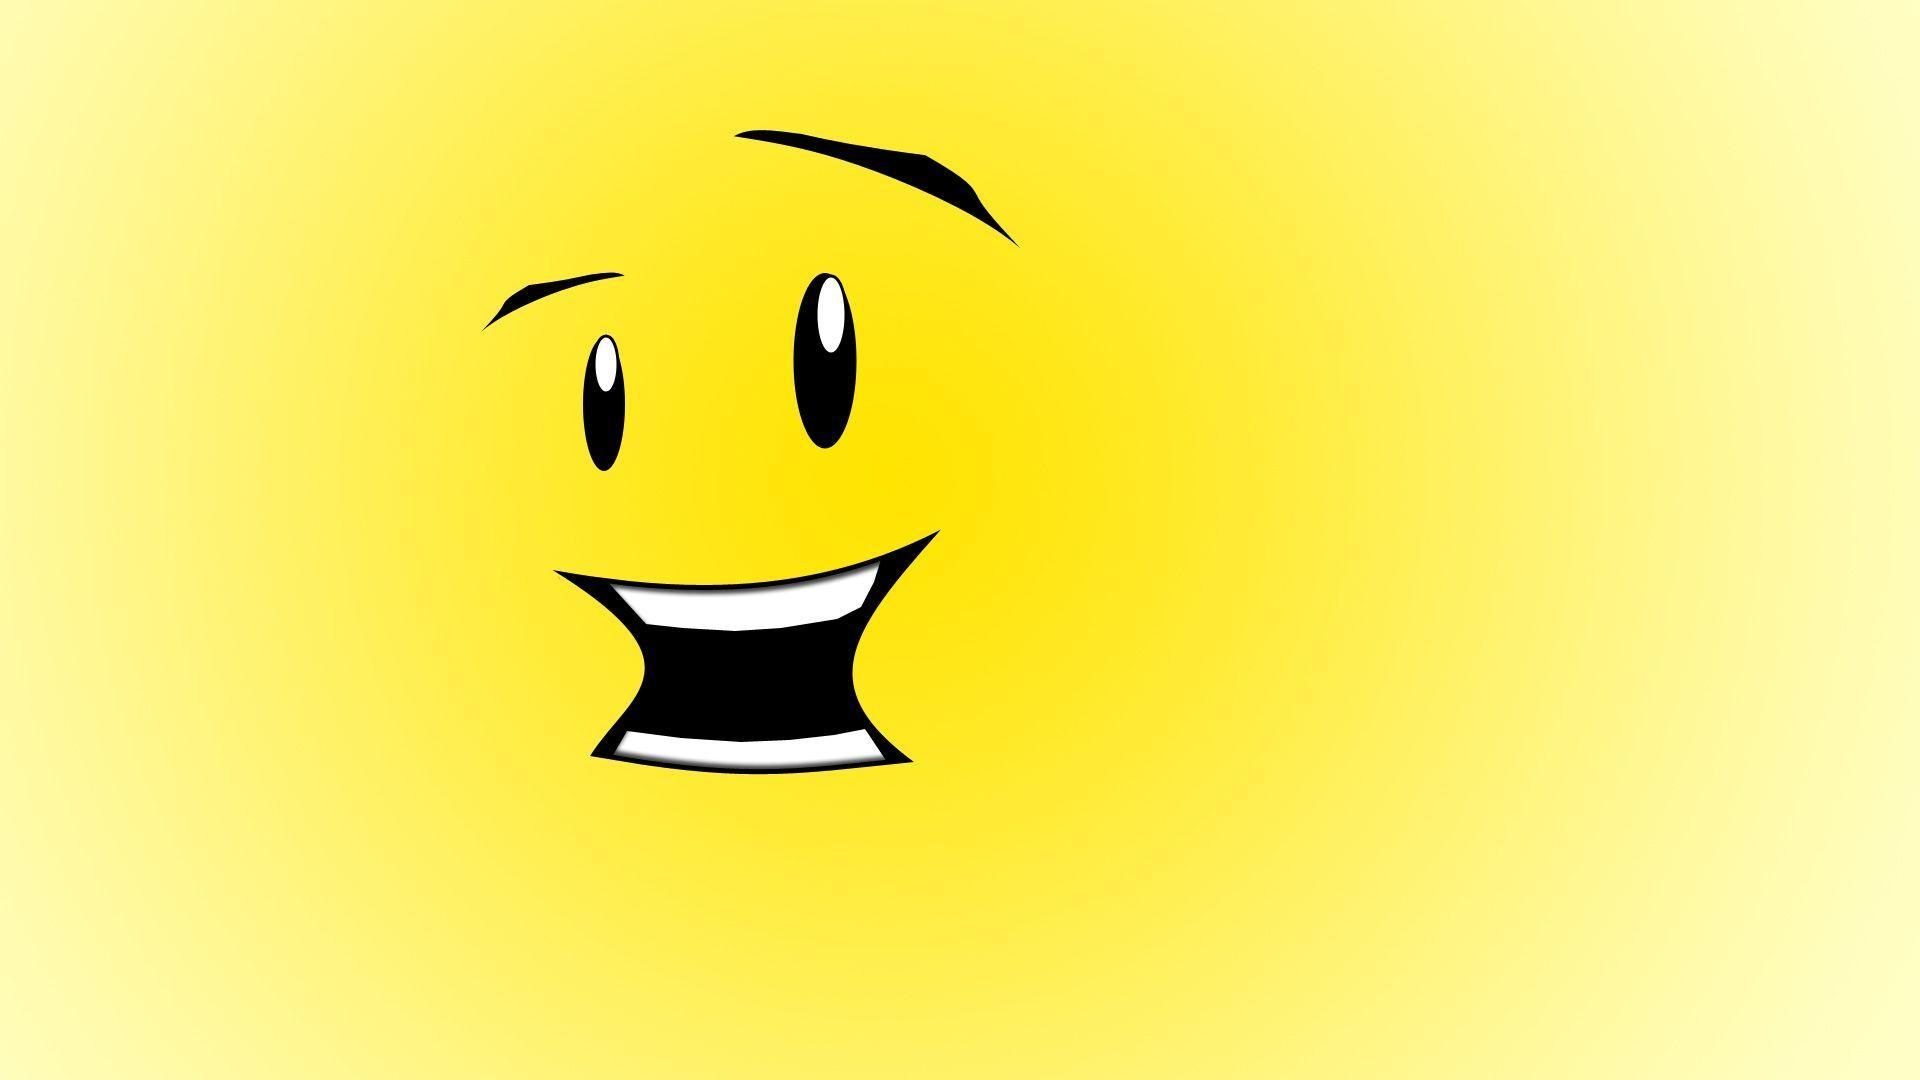 Smiley Faces Background. Free download best Smiley Faces